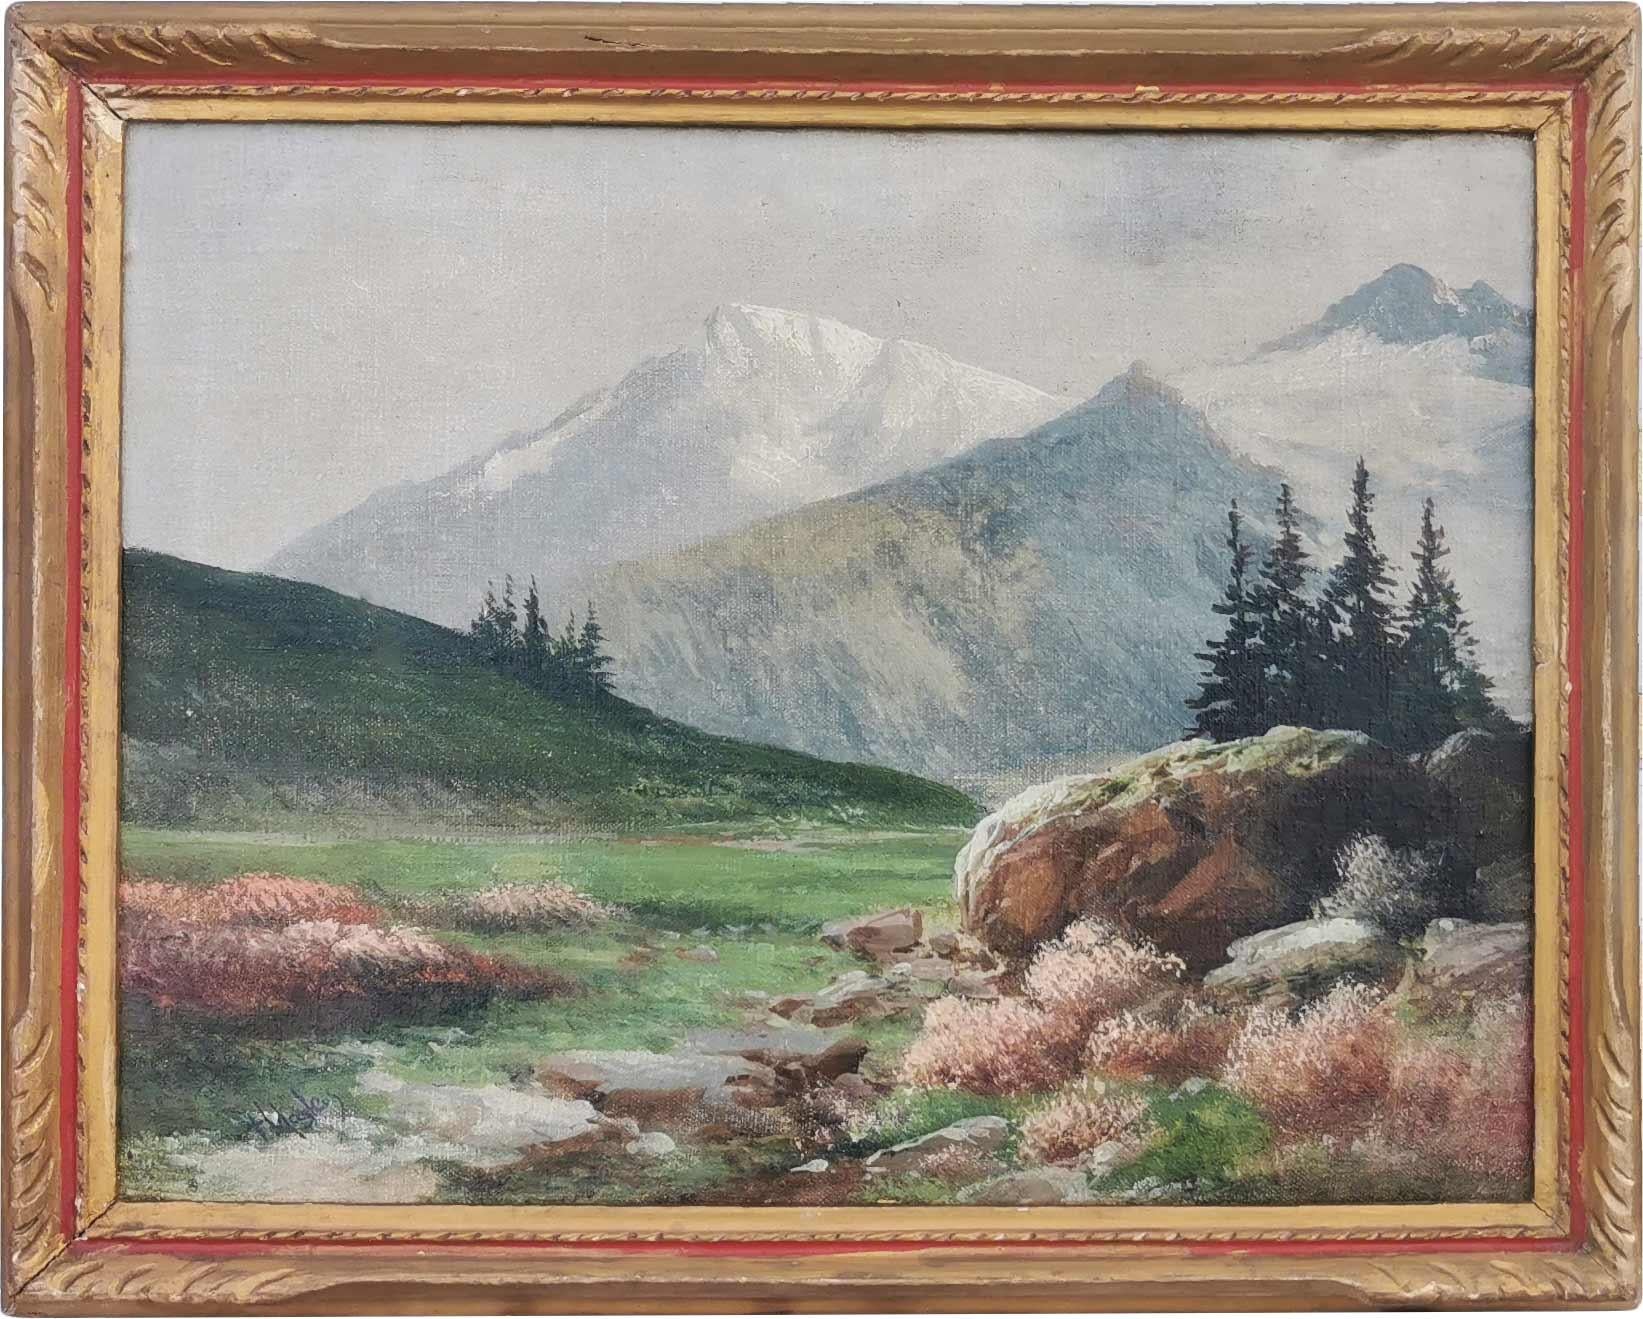 pair of mountain landscape paintings by Henry Marko - 1890 For Sale 2